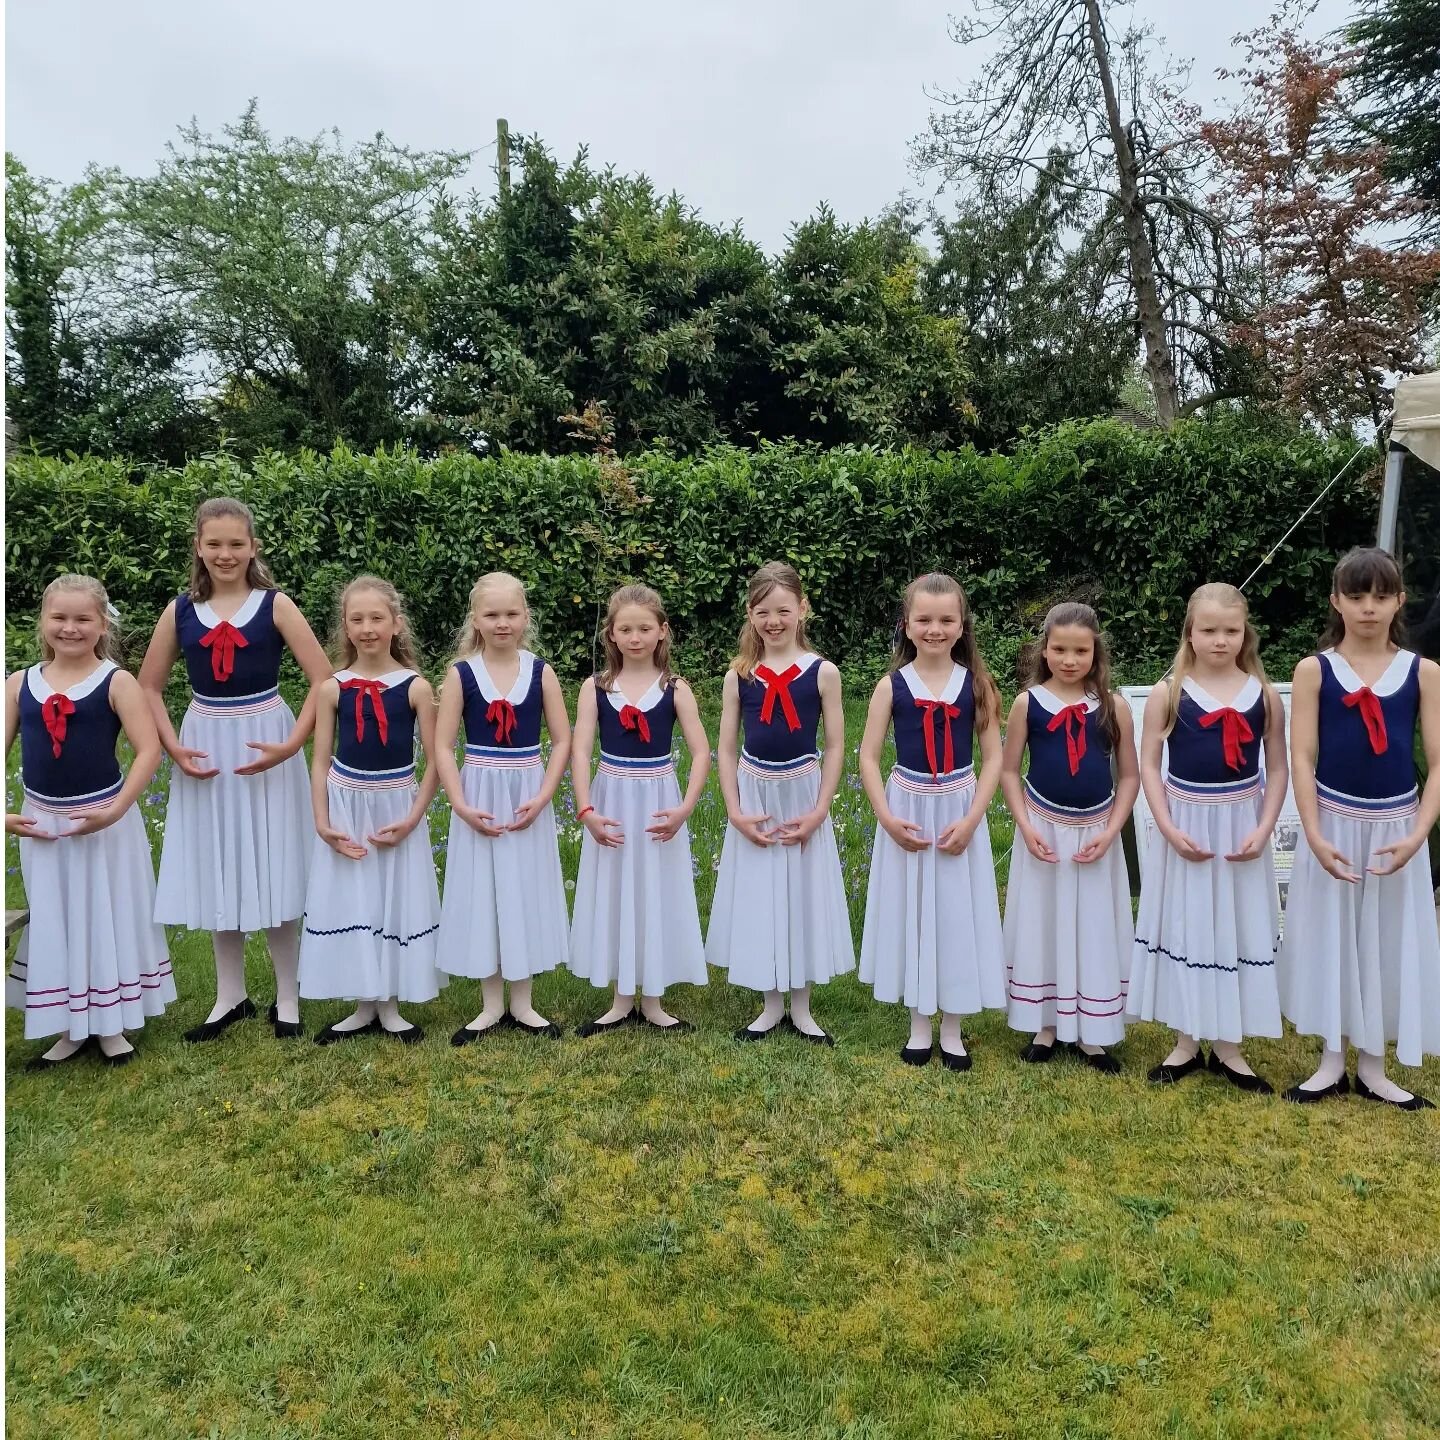 We are so proud of our girls who danced their hearts out at the Prestwood Coronation Fete yesterday 🎉